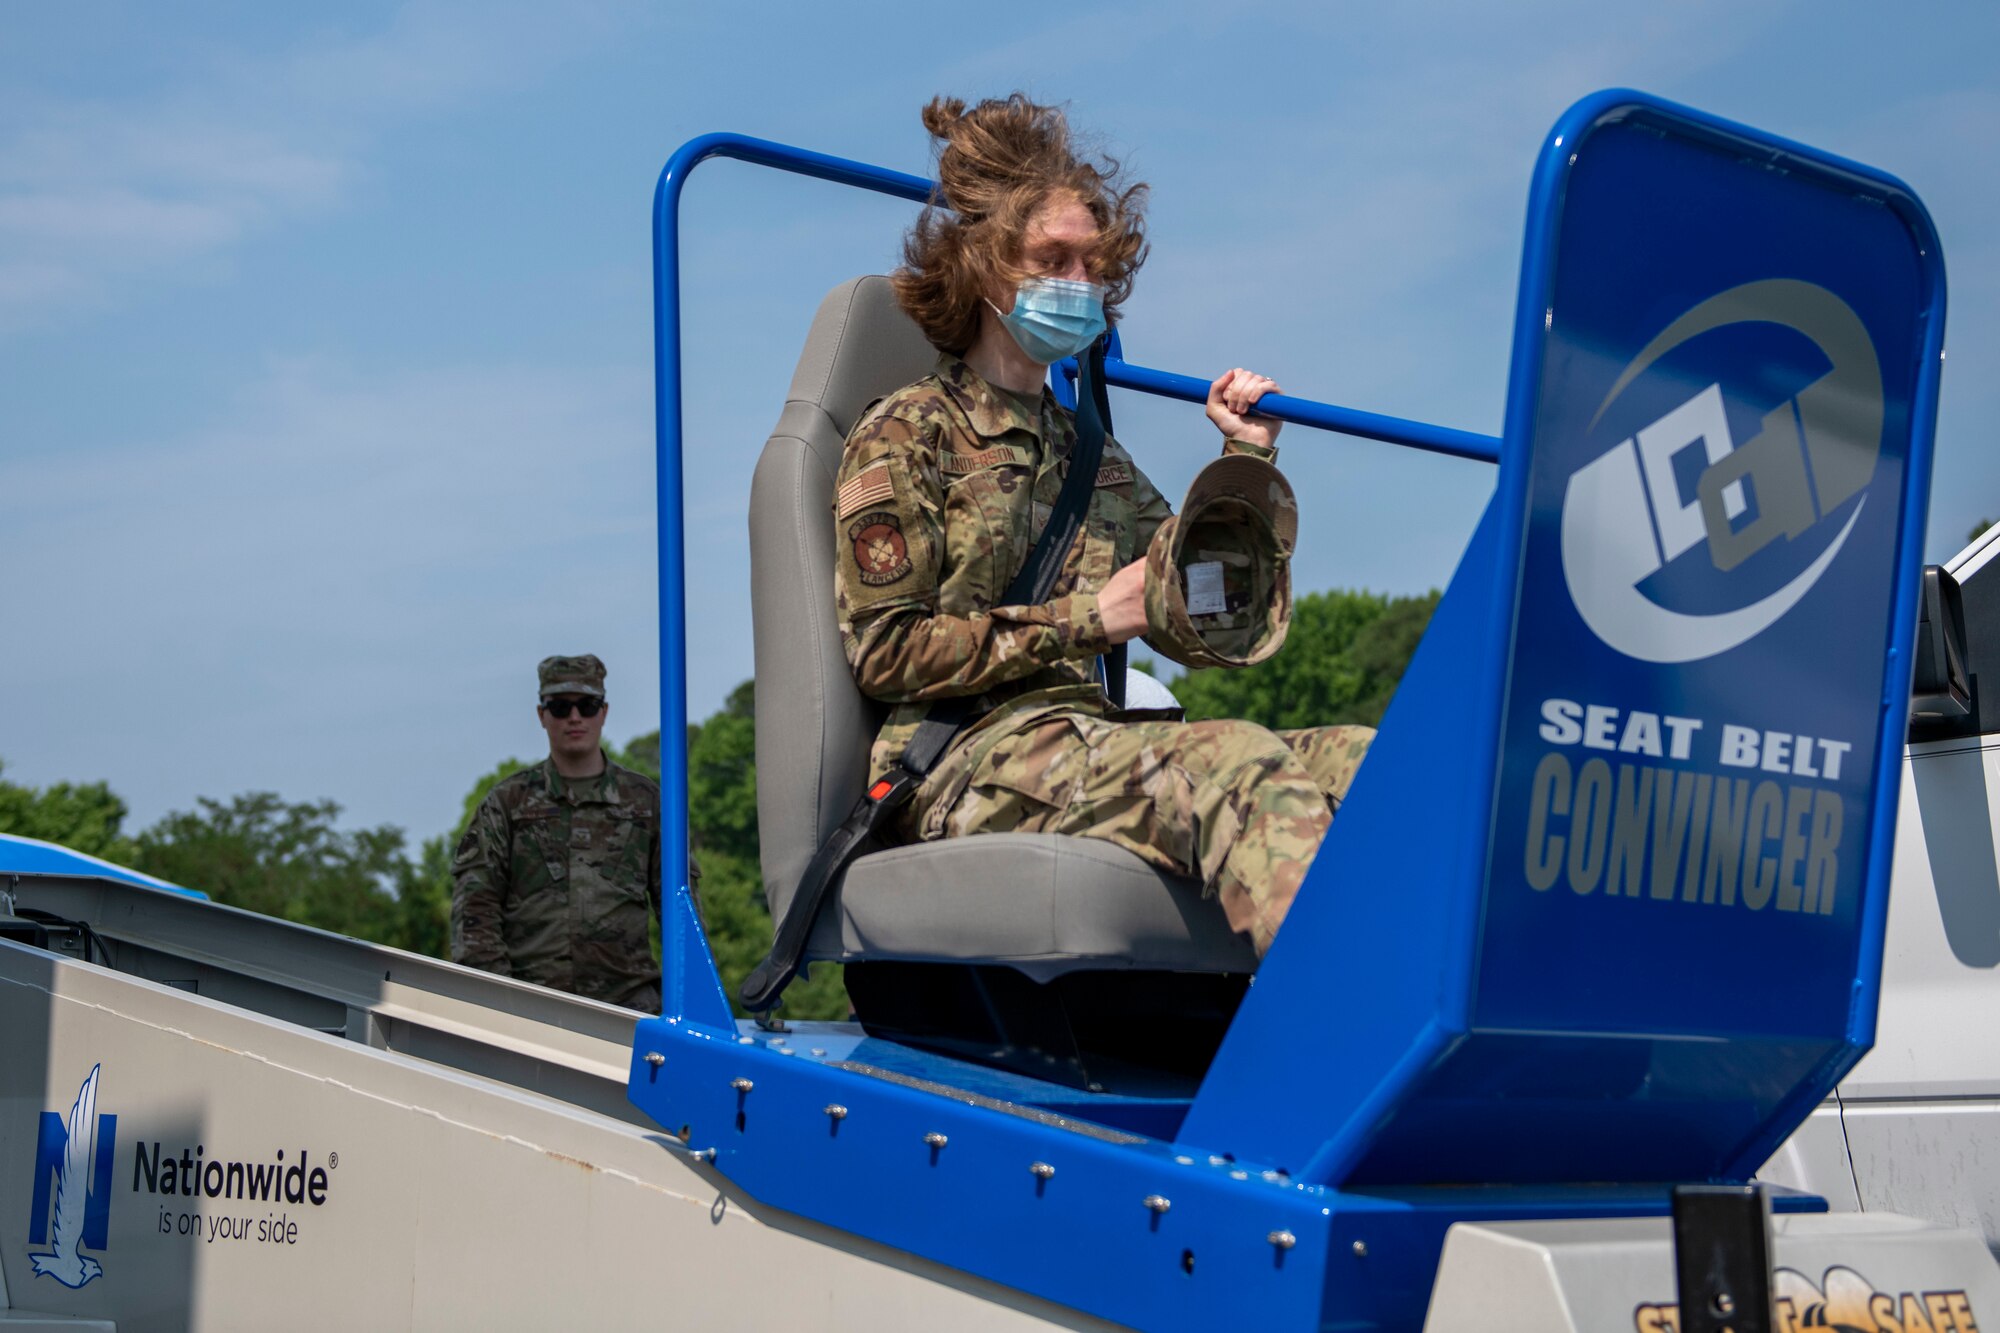 Airman 1st Class Zada Anderson, 334th Fighter Squadron aviation resource management specialist rides on a seat belt convincer during safe driving training at Seymour Johnson Air Force Base, North Carolina, May 26, 2021.